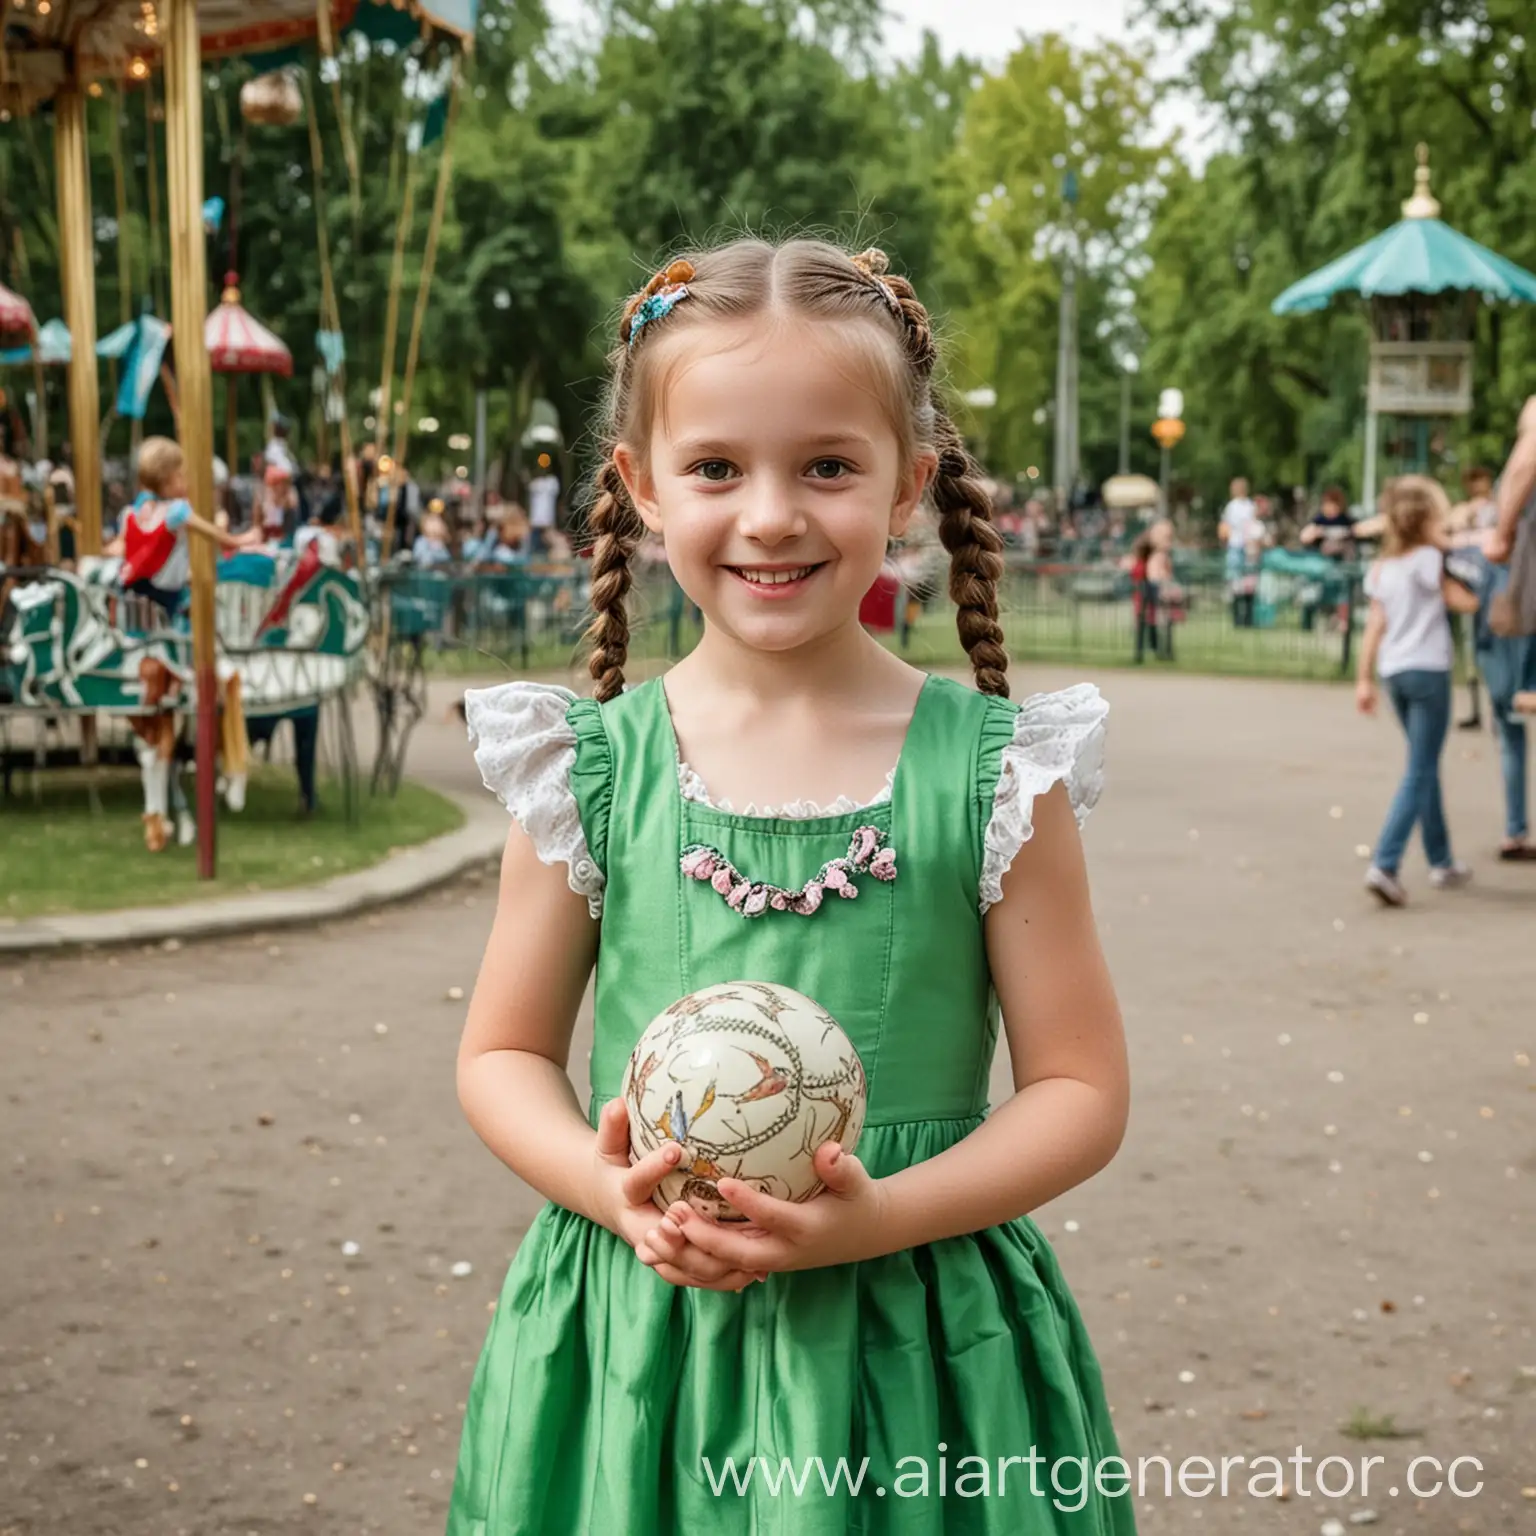 Girls-in-Green-Dresses-Playing-with-Ball-at-Summer-Park-Carousel